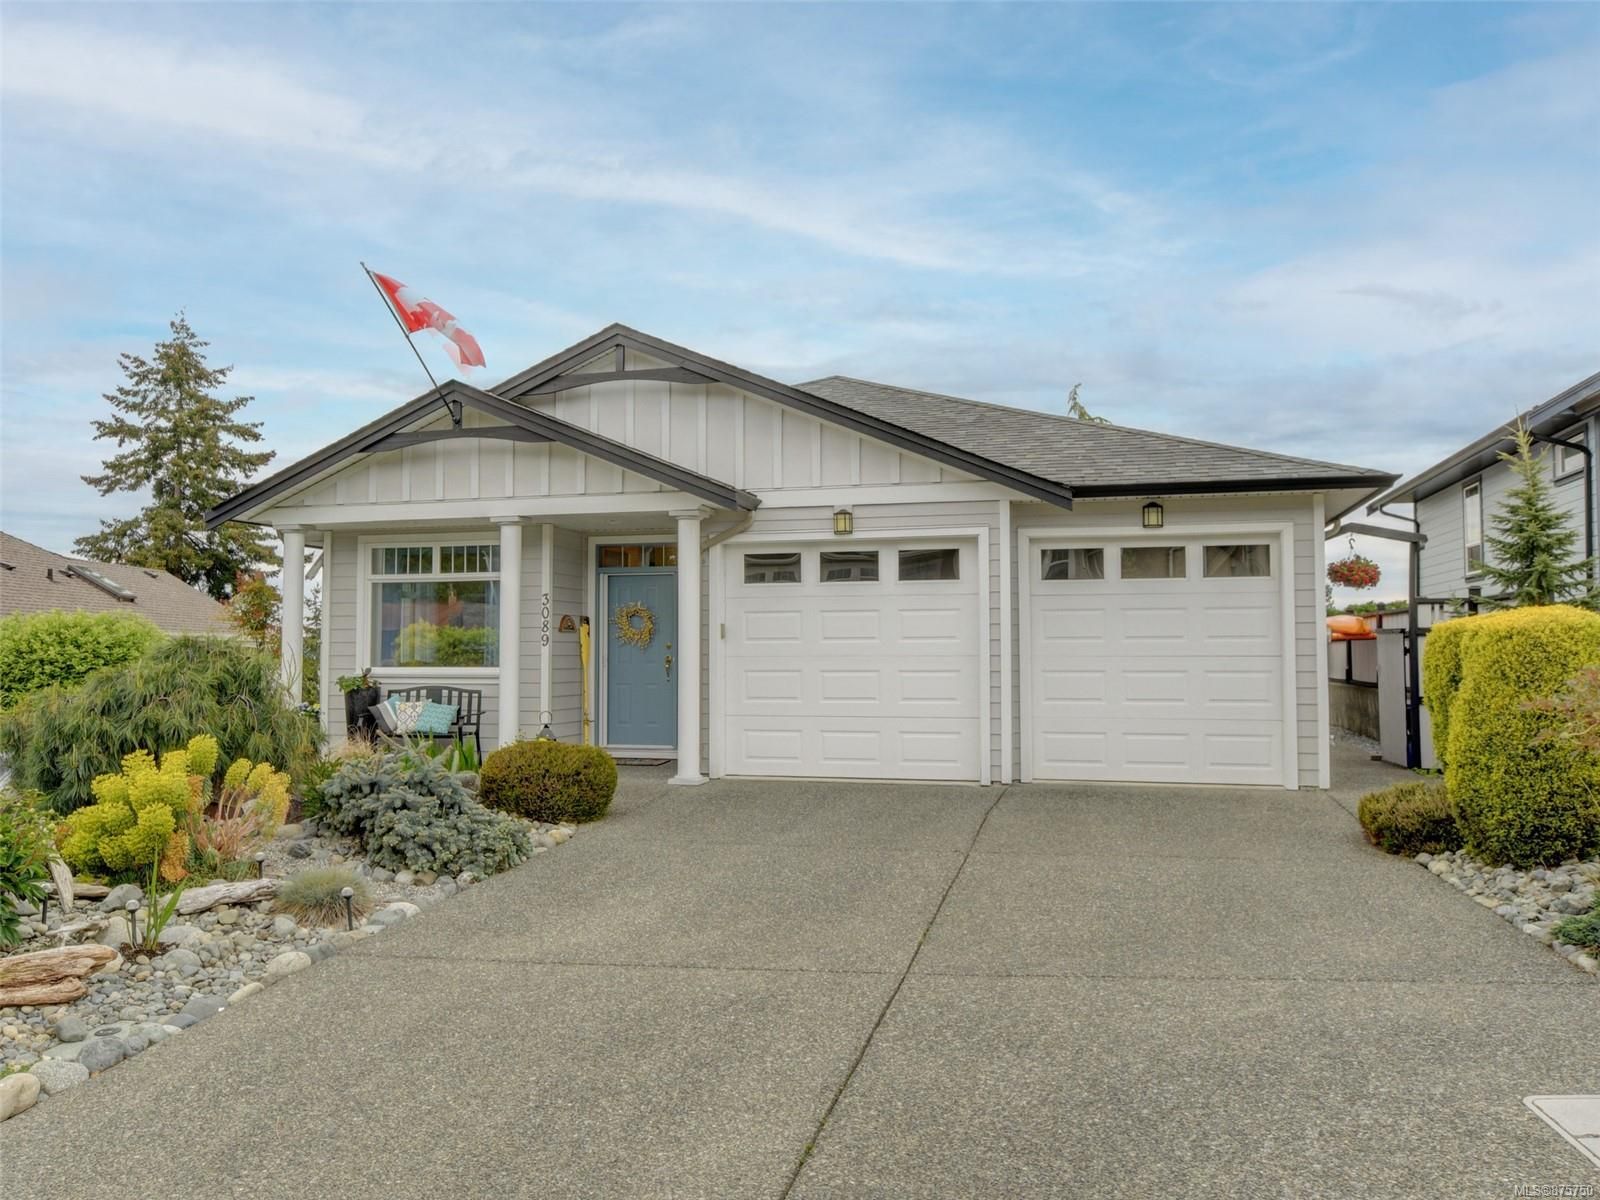 I have sold a property at 3089 Seahaven Rd
